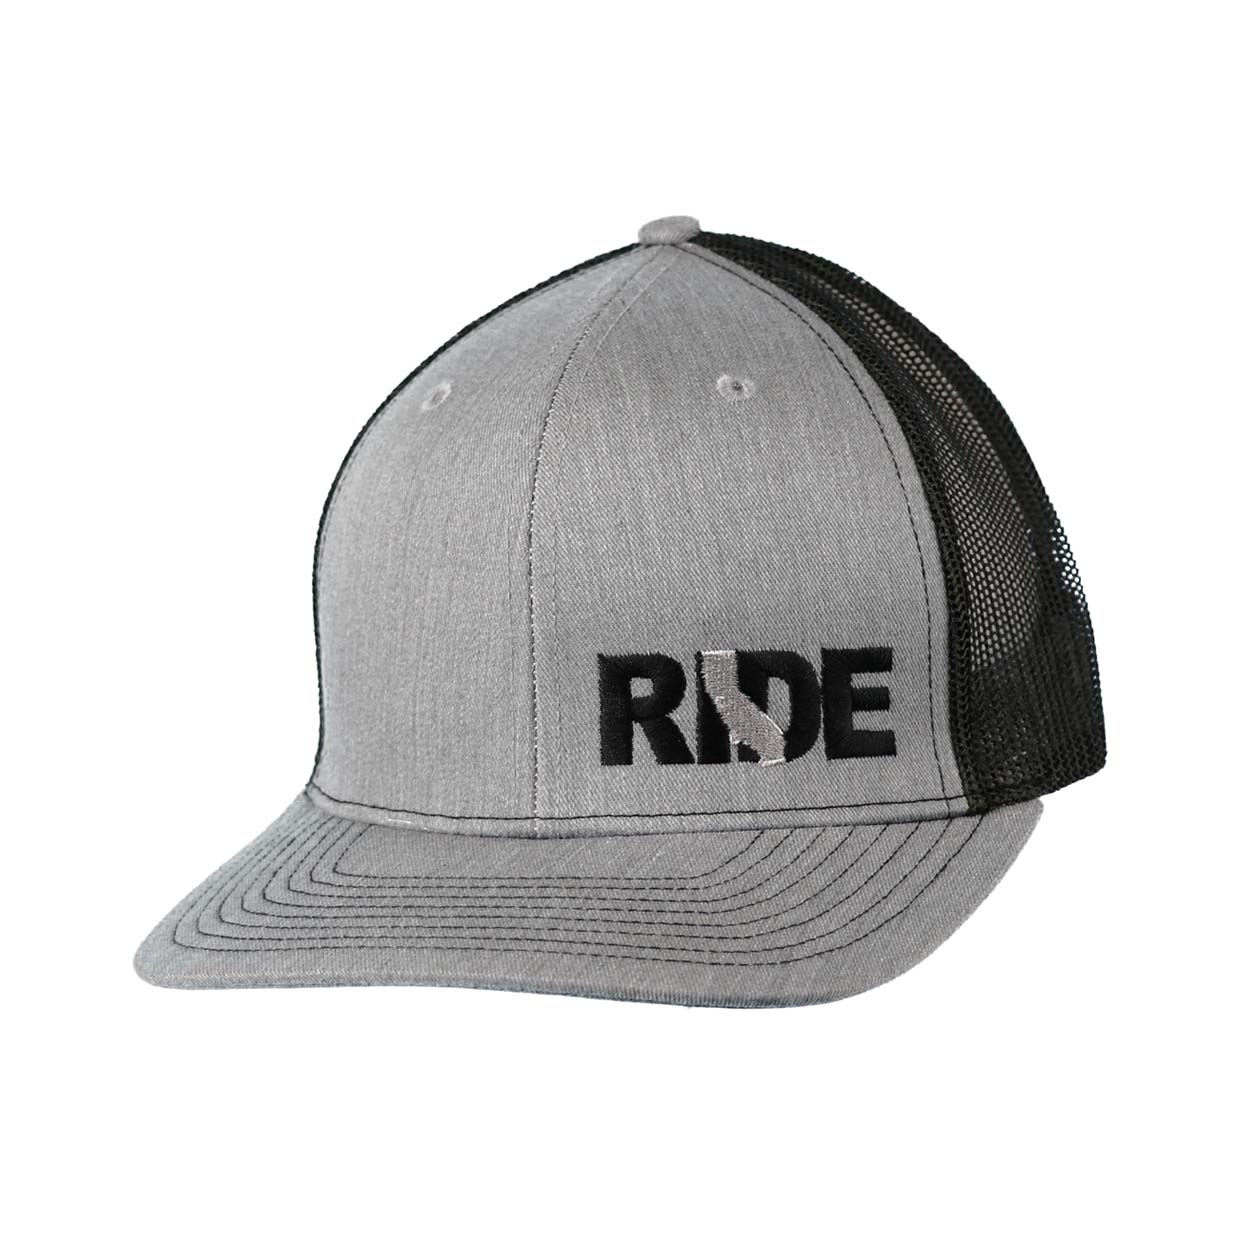 Ride California Classic Pro Night Out Embroidered Snapback Trucker Hat Heather Gray/Black